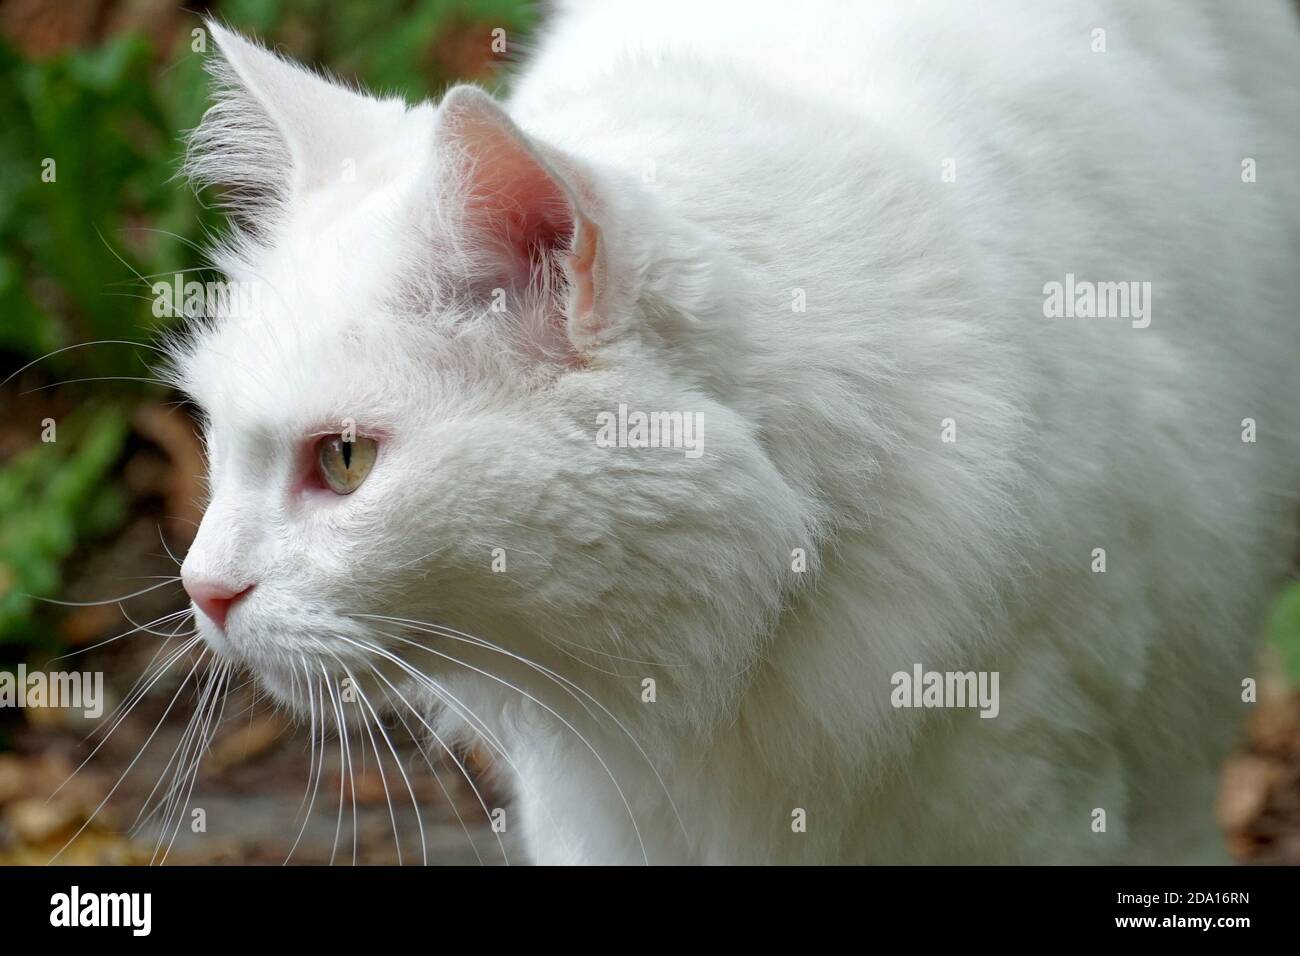 A head of a white cat with green eyes in lateral view, outdoors with a lot of copy space. Stock Photo